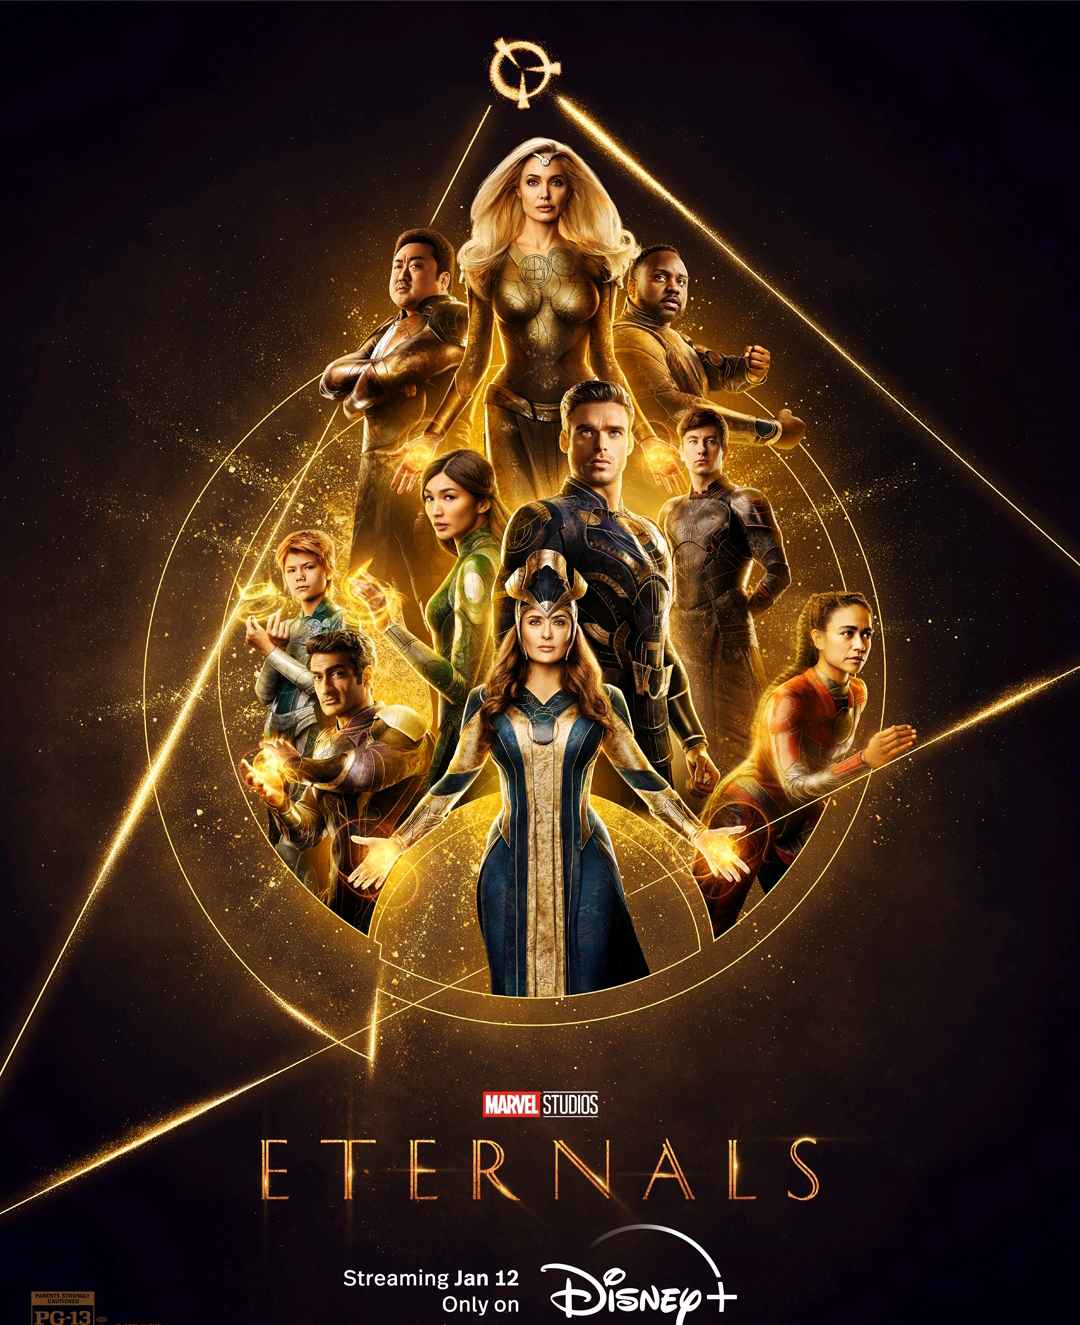 ETERNALS 2 THEORY REVEALS WHICH AVENGERS ARE MOST LIKELY TO APPEAR IN SEQUELS